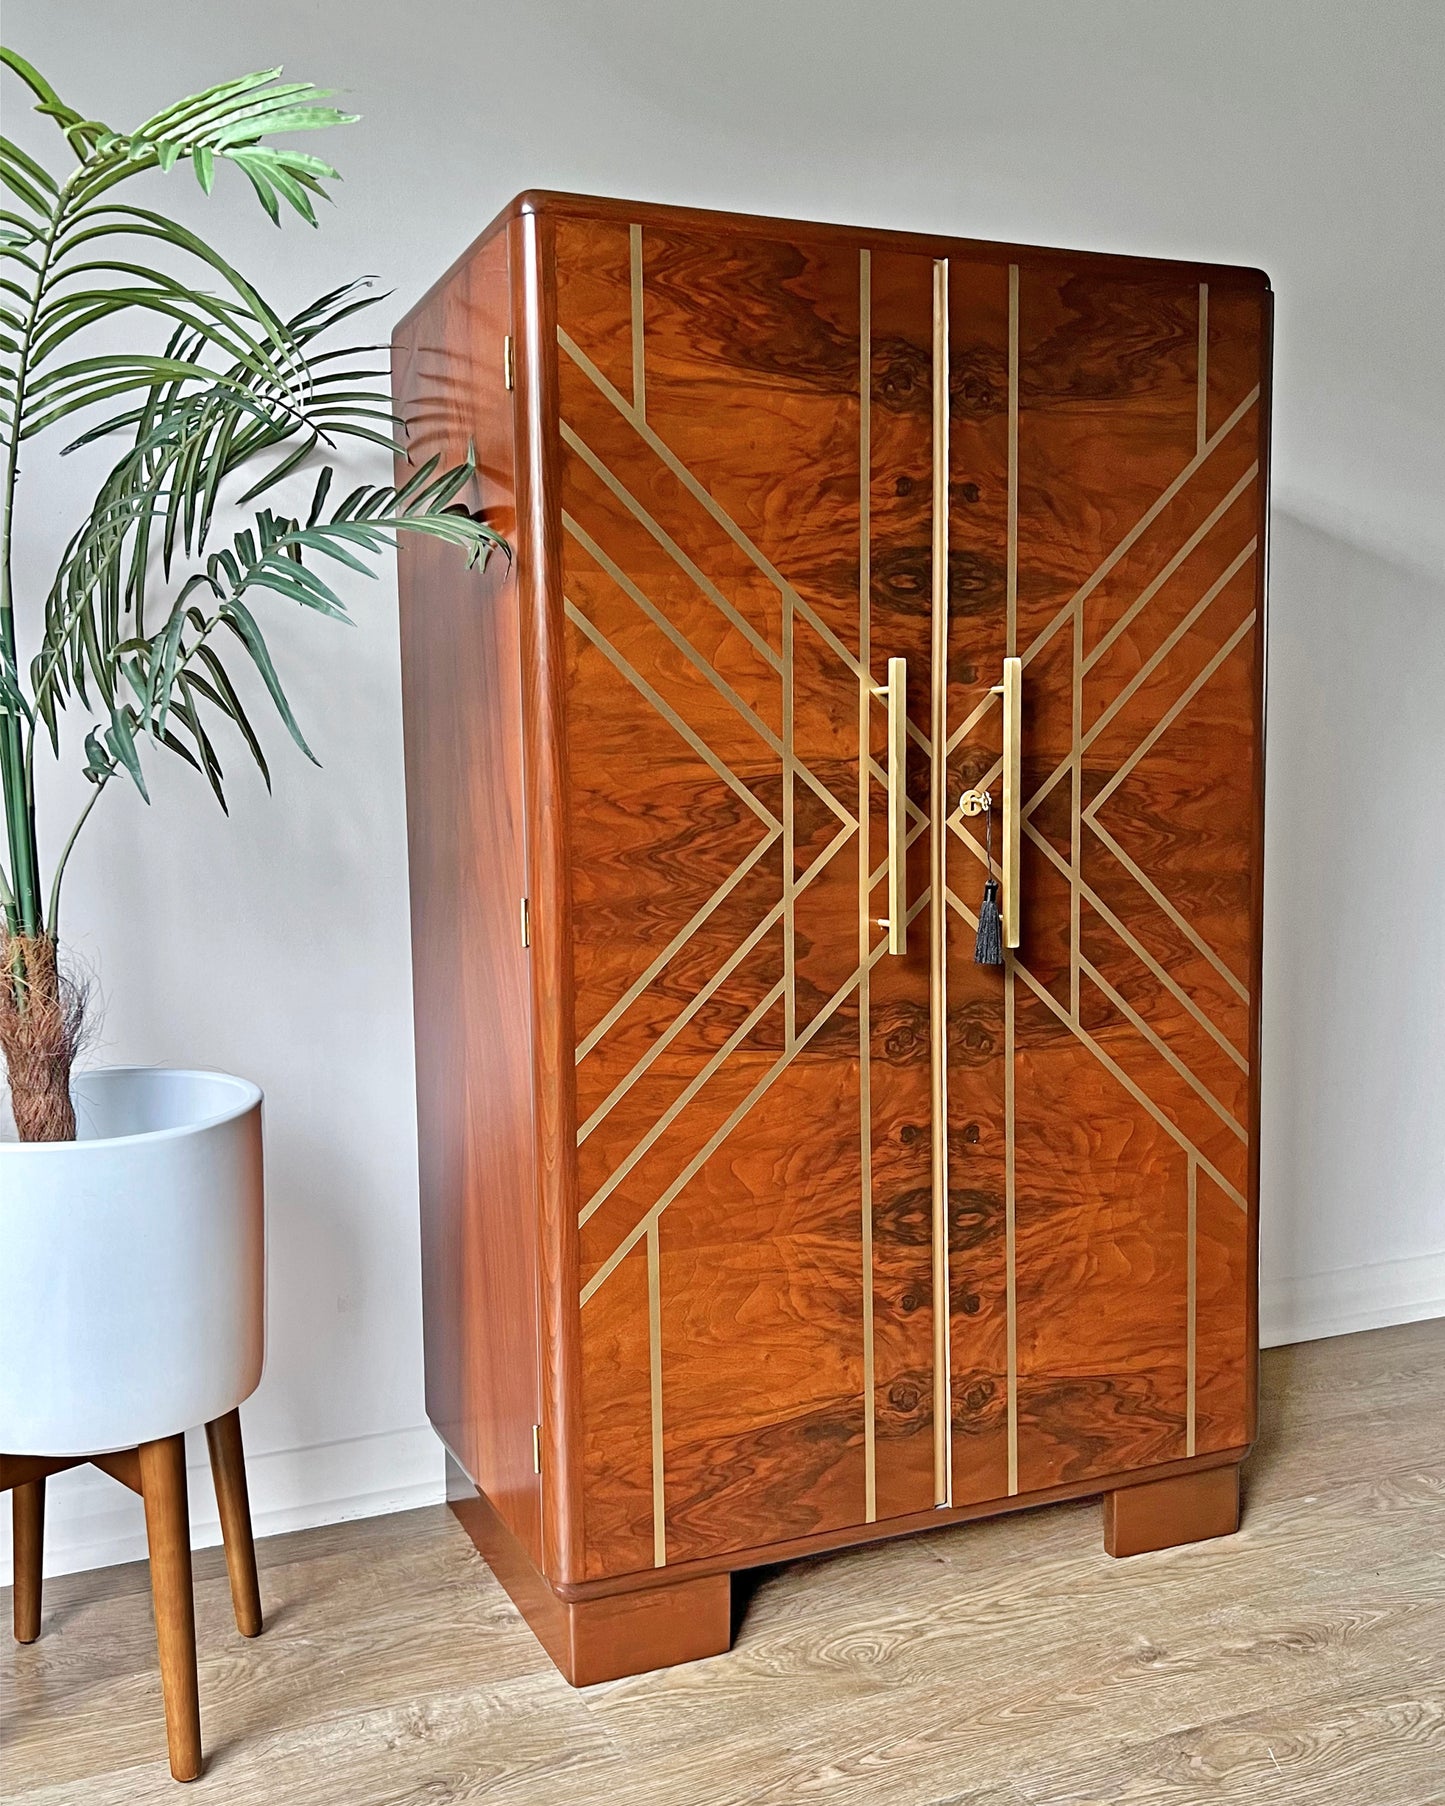 Large Gold Geometric Art Deco Walnut Drinks Cocktail Gin Wine Bar Cabinet - MADE TO ORDER